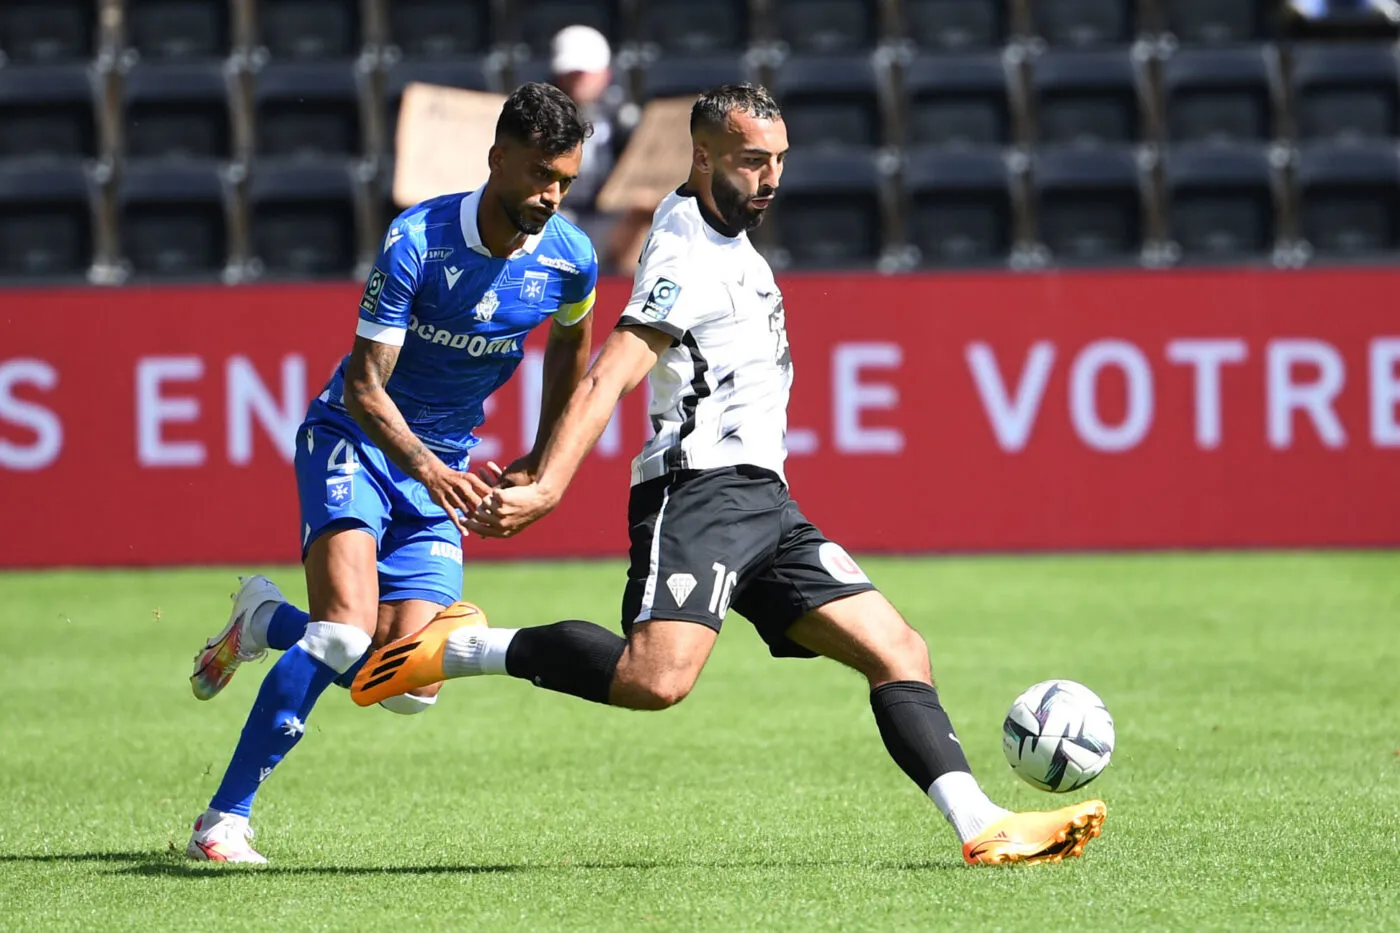 04 Jubal ROCHA MENDES JUNIOR (aja) - 10 Himad ABDELLI (sco) during the Ligue 2 BKT match between Angers Sporting Club de l'Ouest and Association de la Jeunesse Auxerroise at Stade Raymond Kopa on August 19, 2023 in Angers, France. (Photo by Christophe Saidi/FEP/Icon Sport)